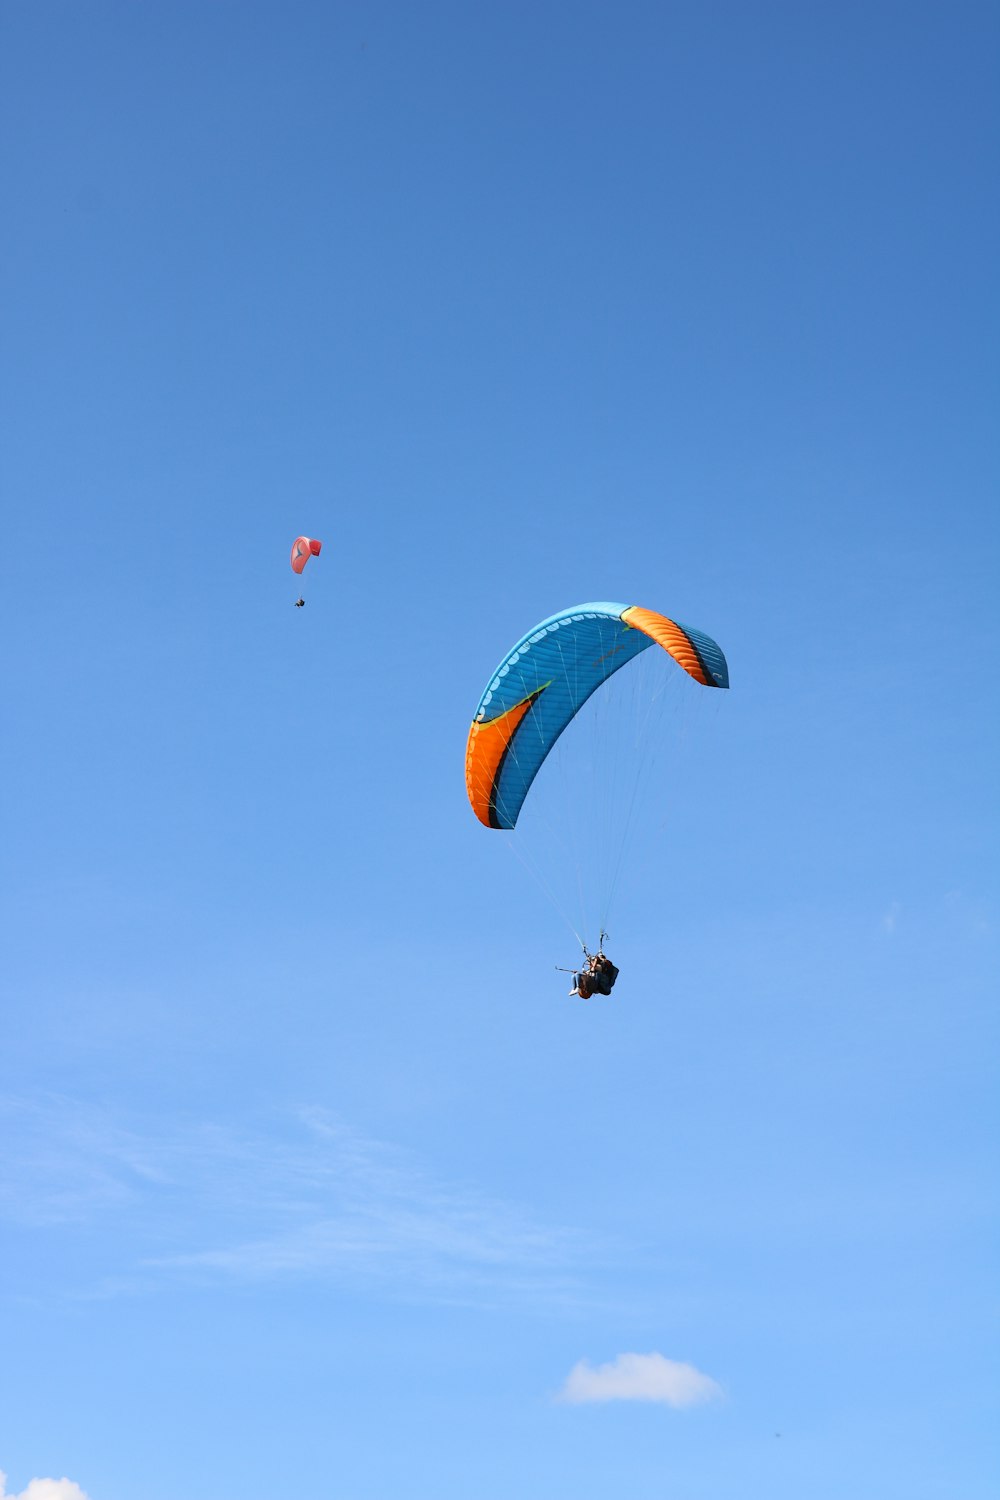 person in red and yellow parachute in mid air during daytime